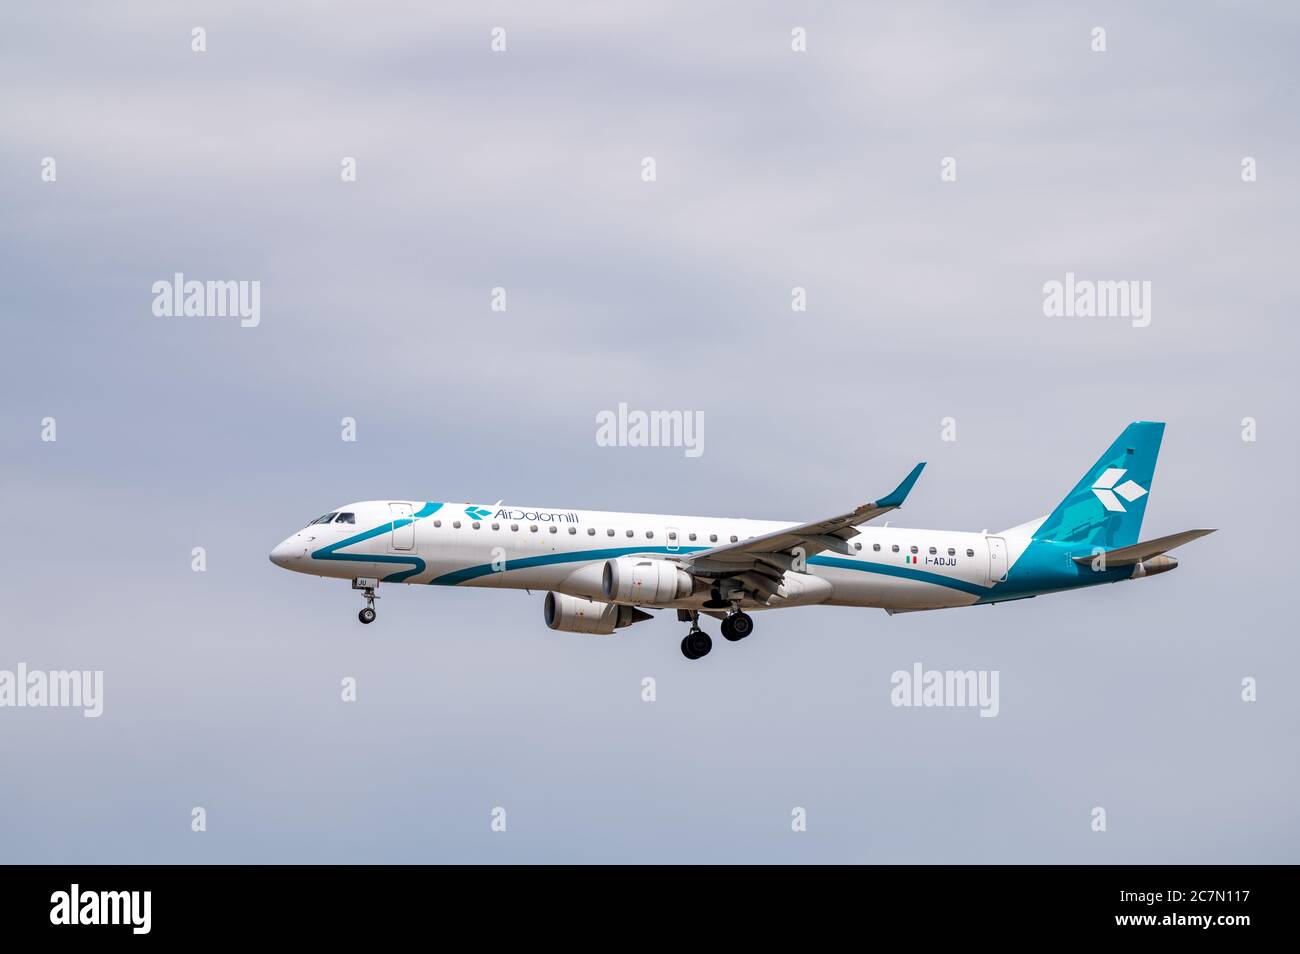 Air Dolomiti Embraer ERJ195LR / E195 I-ADJU in landing configuration on approach to land at Frankfurt airport in Germany Stock Photo